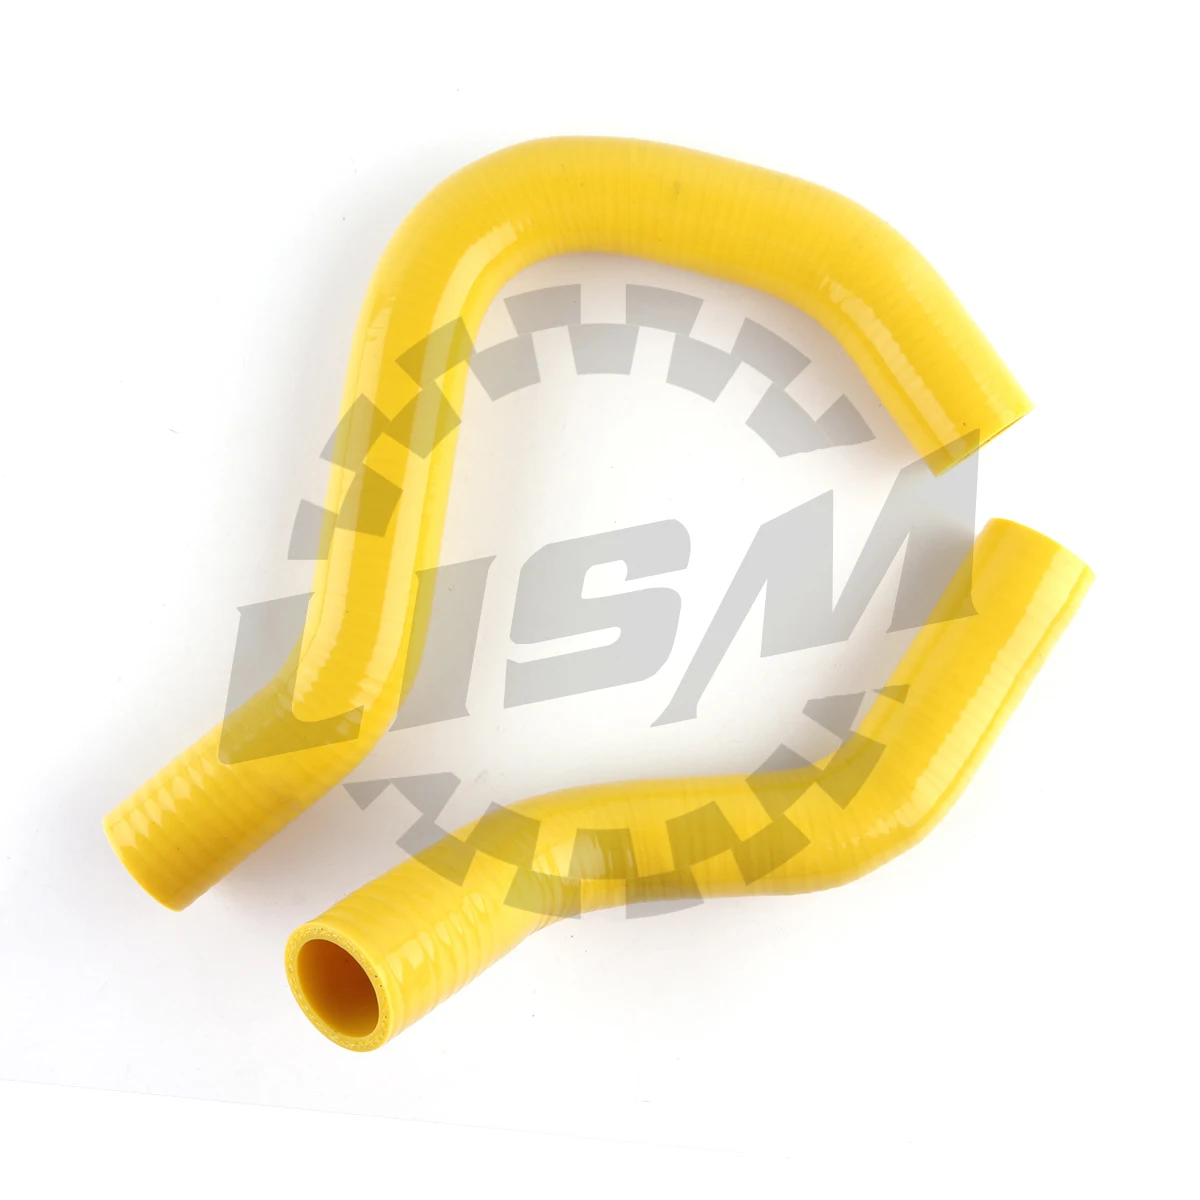 

For Honda Civic Si SiR TYPE R EP3 K20A 01-05 Silicone Radiator Coolant Hose Kit